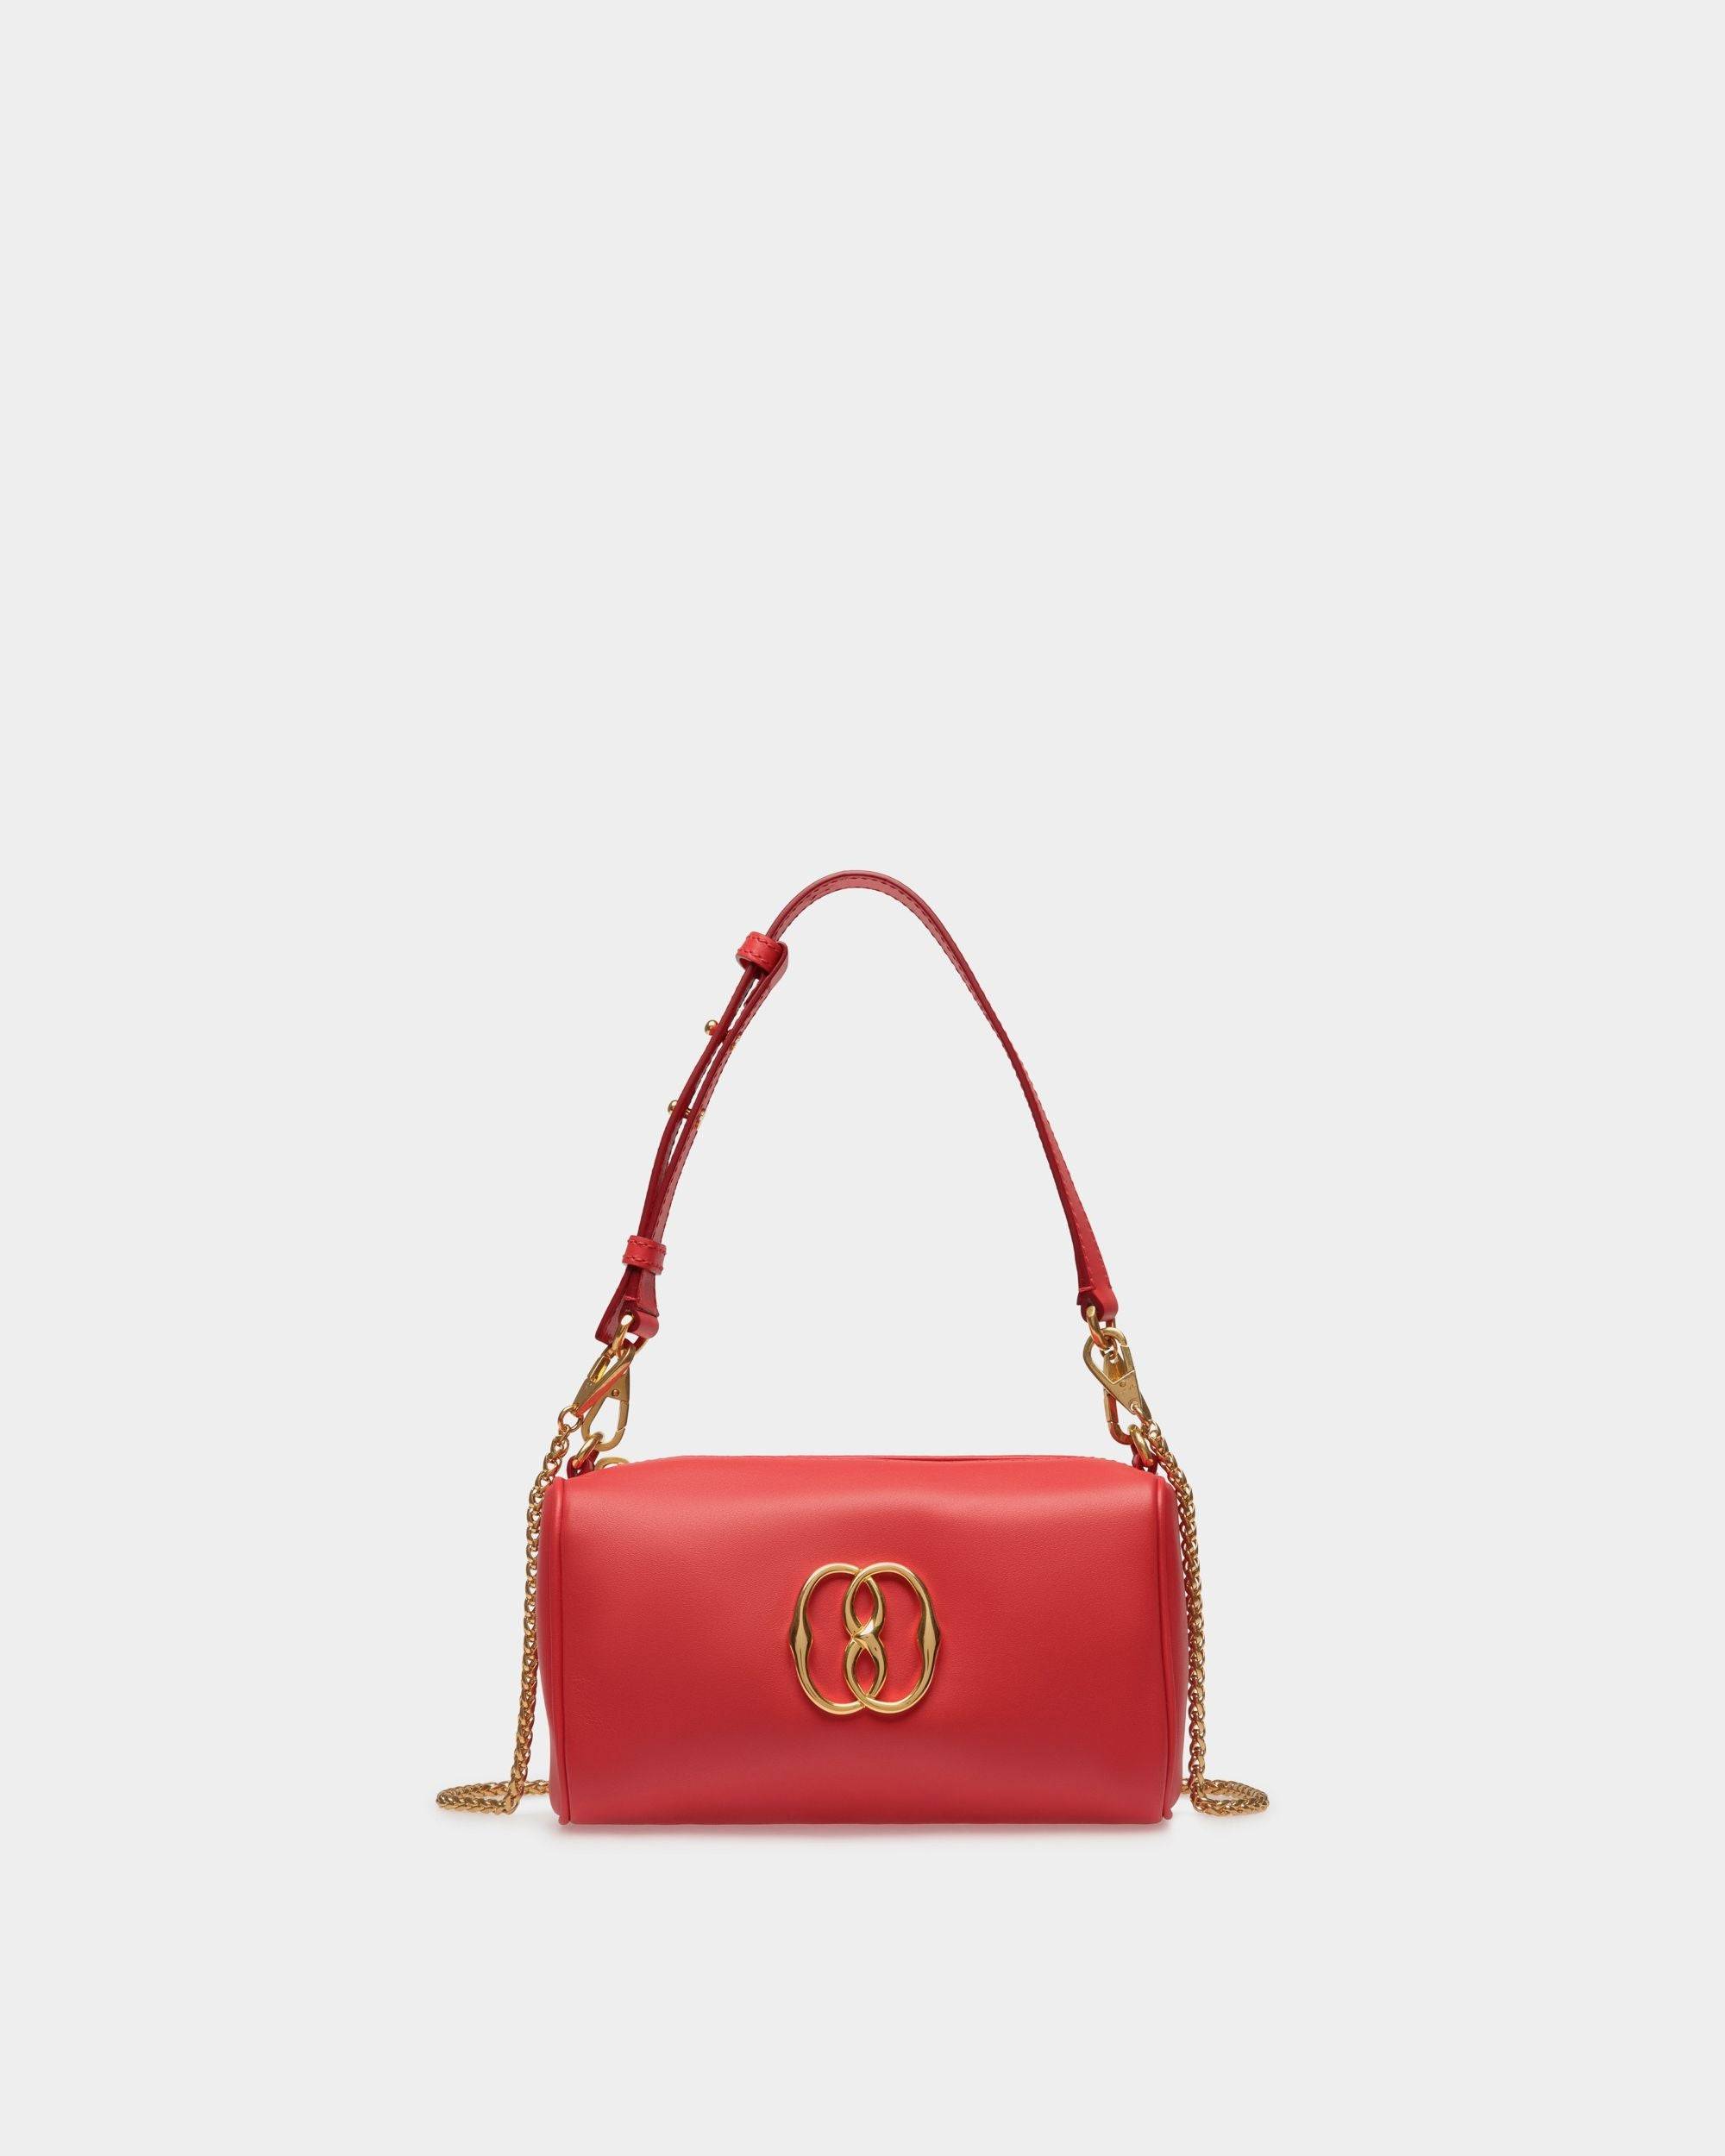 Women's Emblem Mini Bag In Red Leather | Bally | Still Life Front